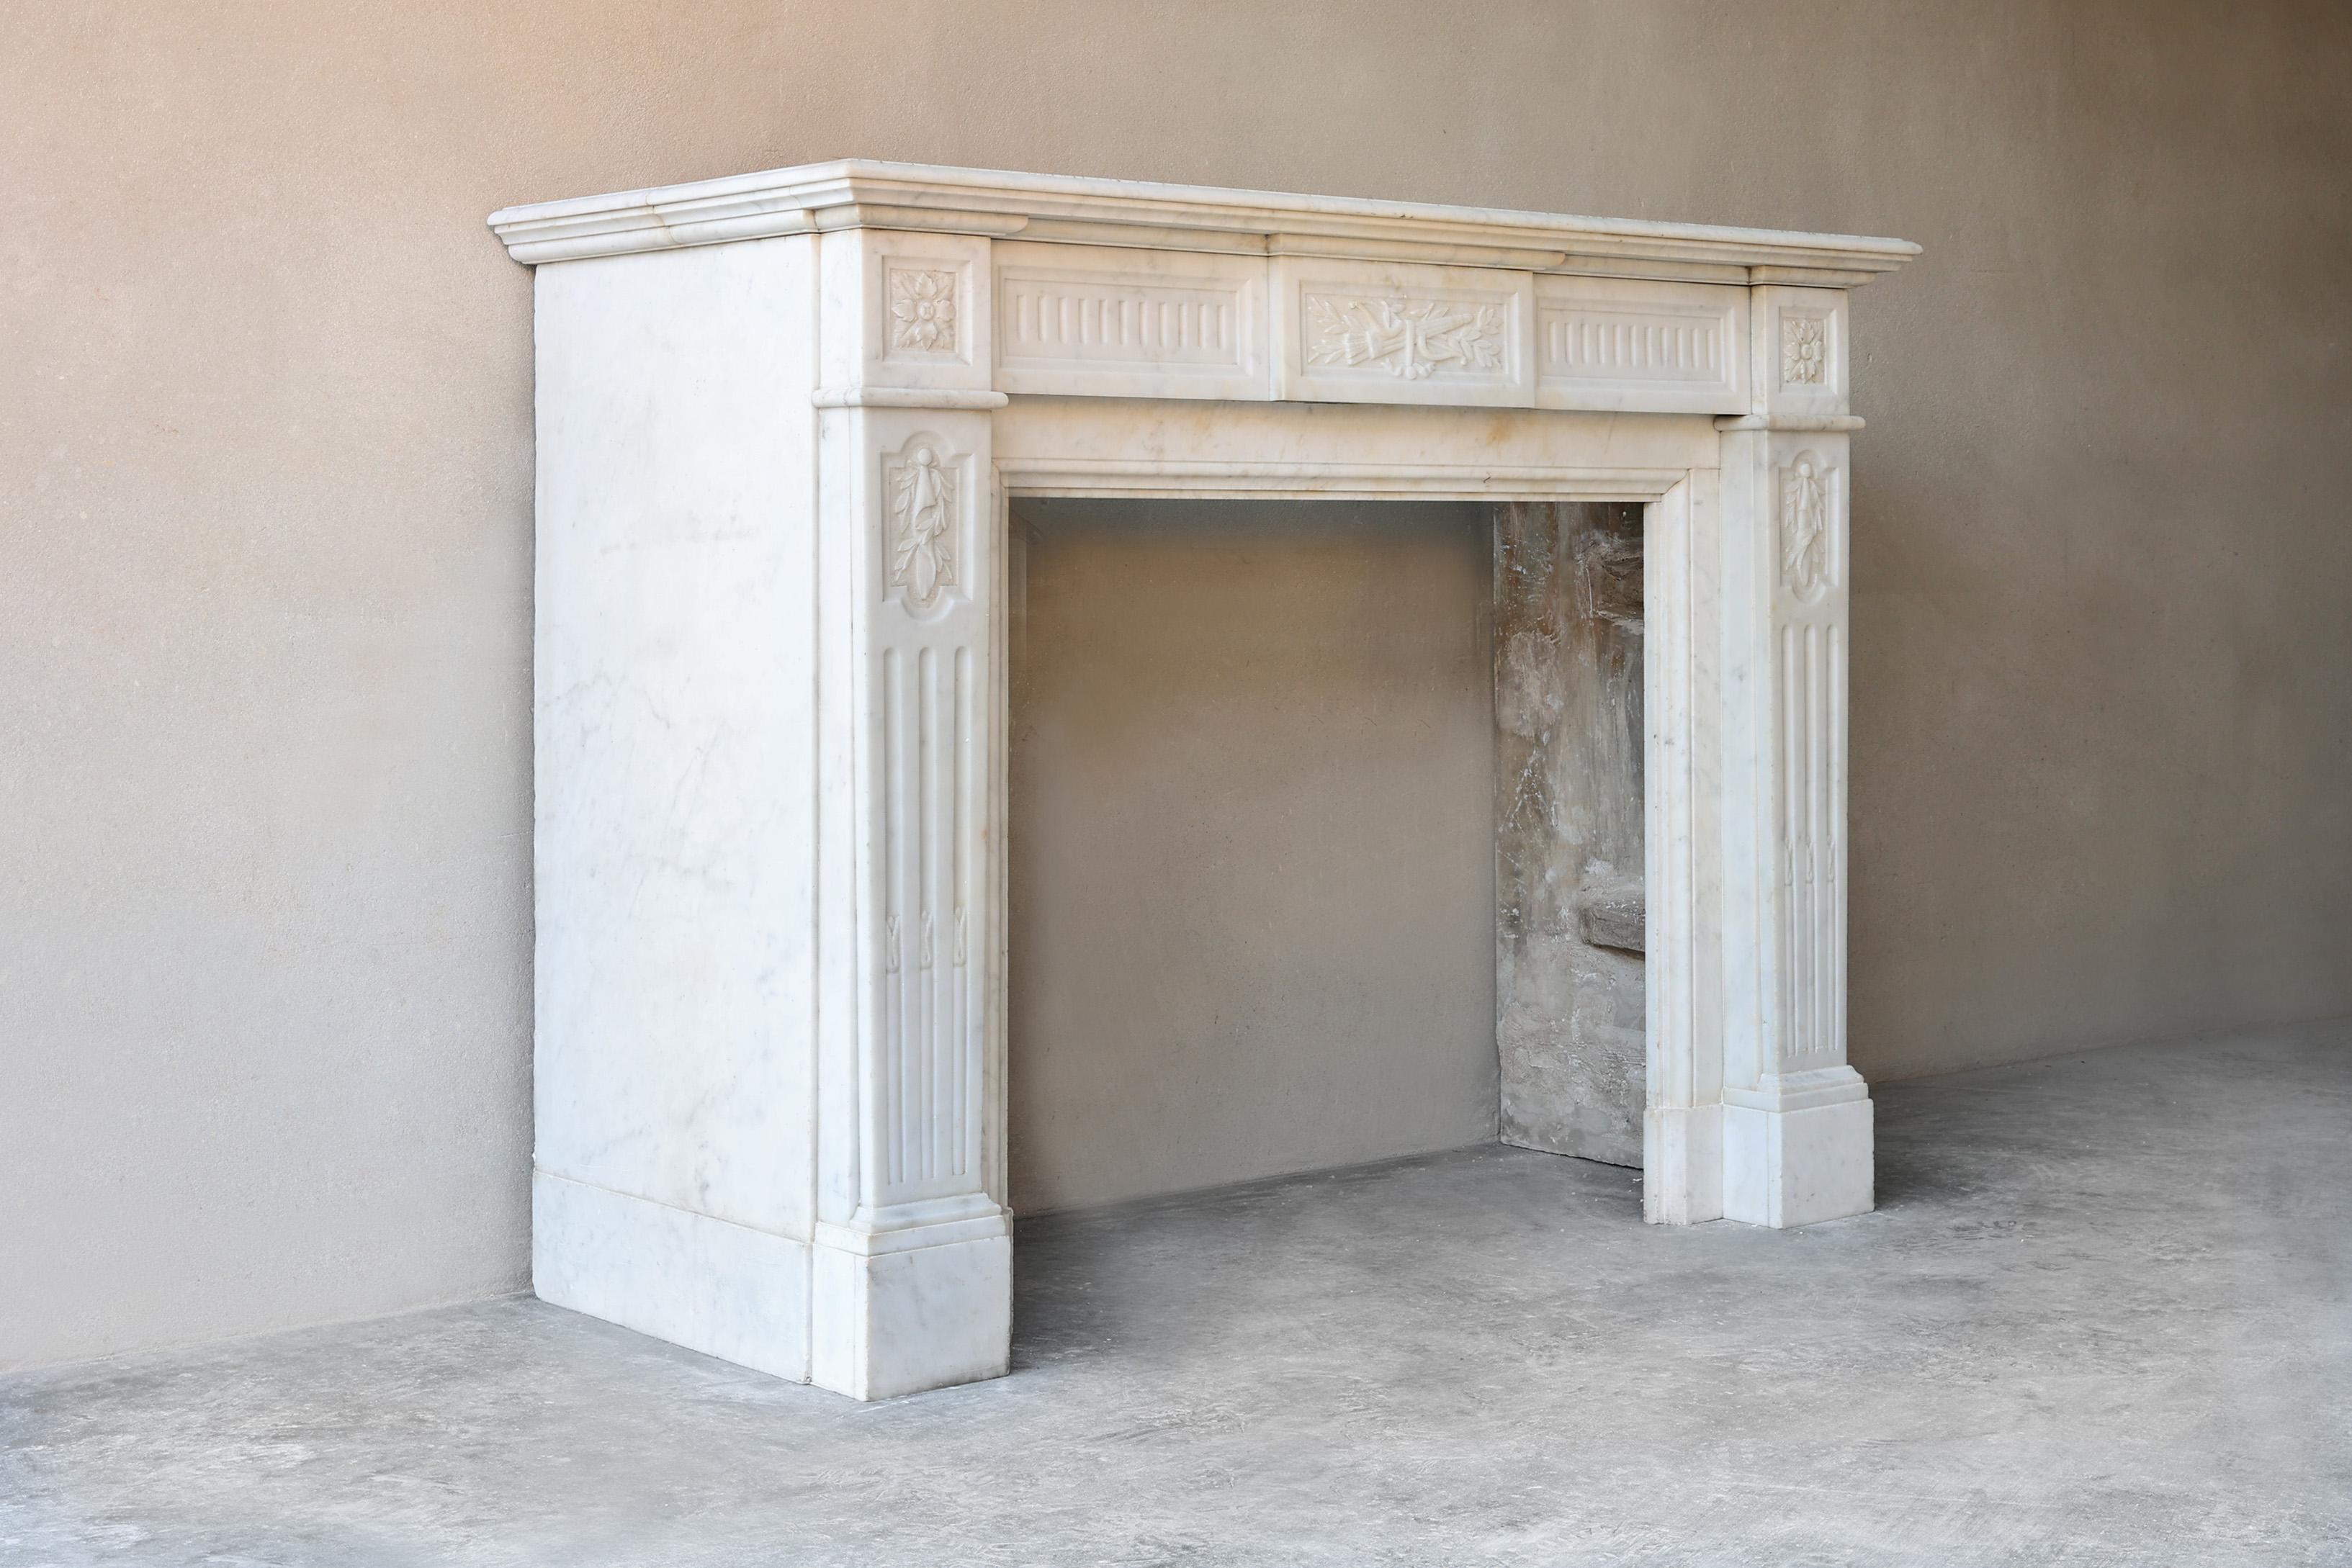 Very beautiful antique fireplace that is richly decorated with decorative elements and therefore has an elegant appearance. This Carrara marble mantel dates from the 19th century and is in the style of Louis XVI. A straight fireplace with various